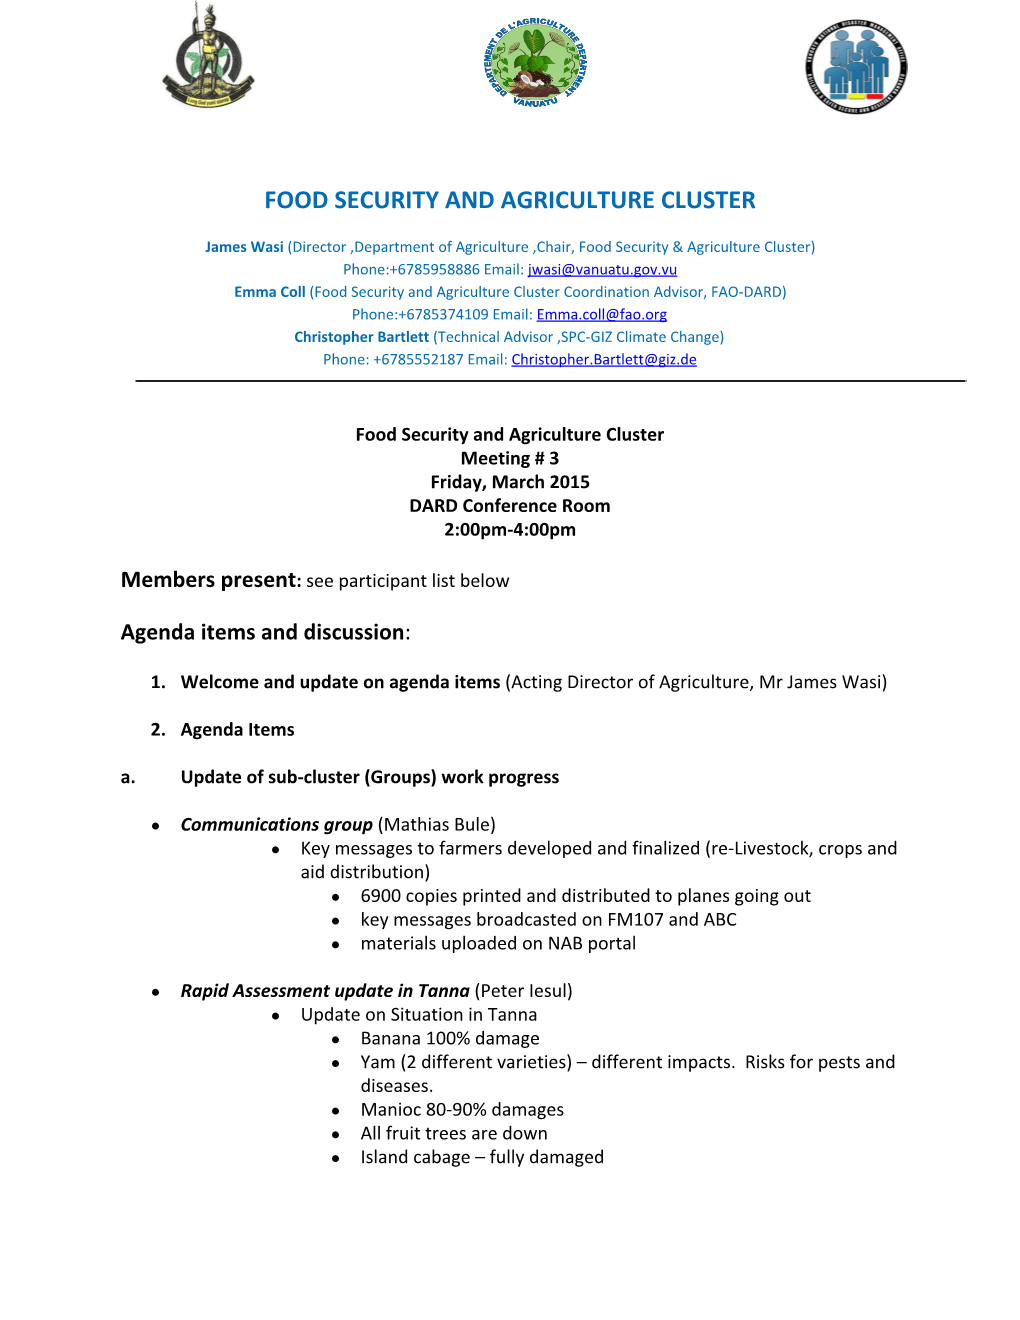 Food Security and Agriculture Cluster